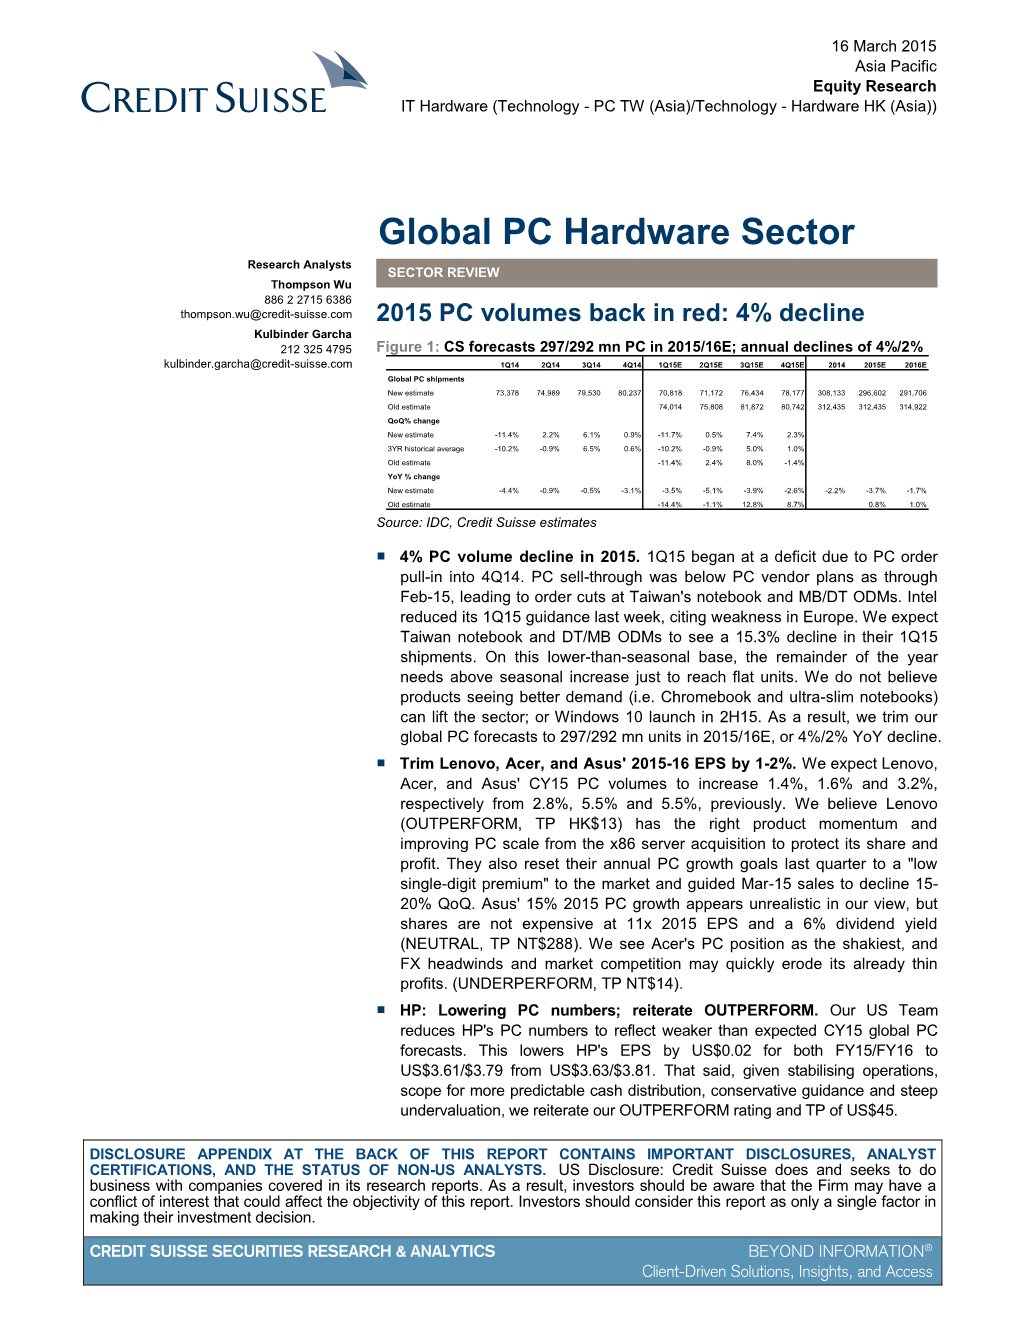 Global PC Hardware Sector Research Analysts SECTOR REVIEW